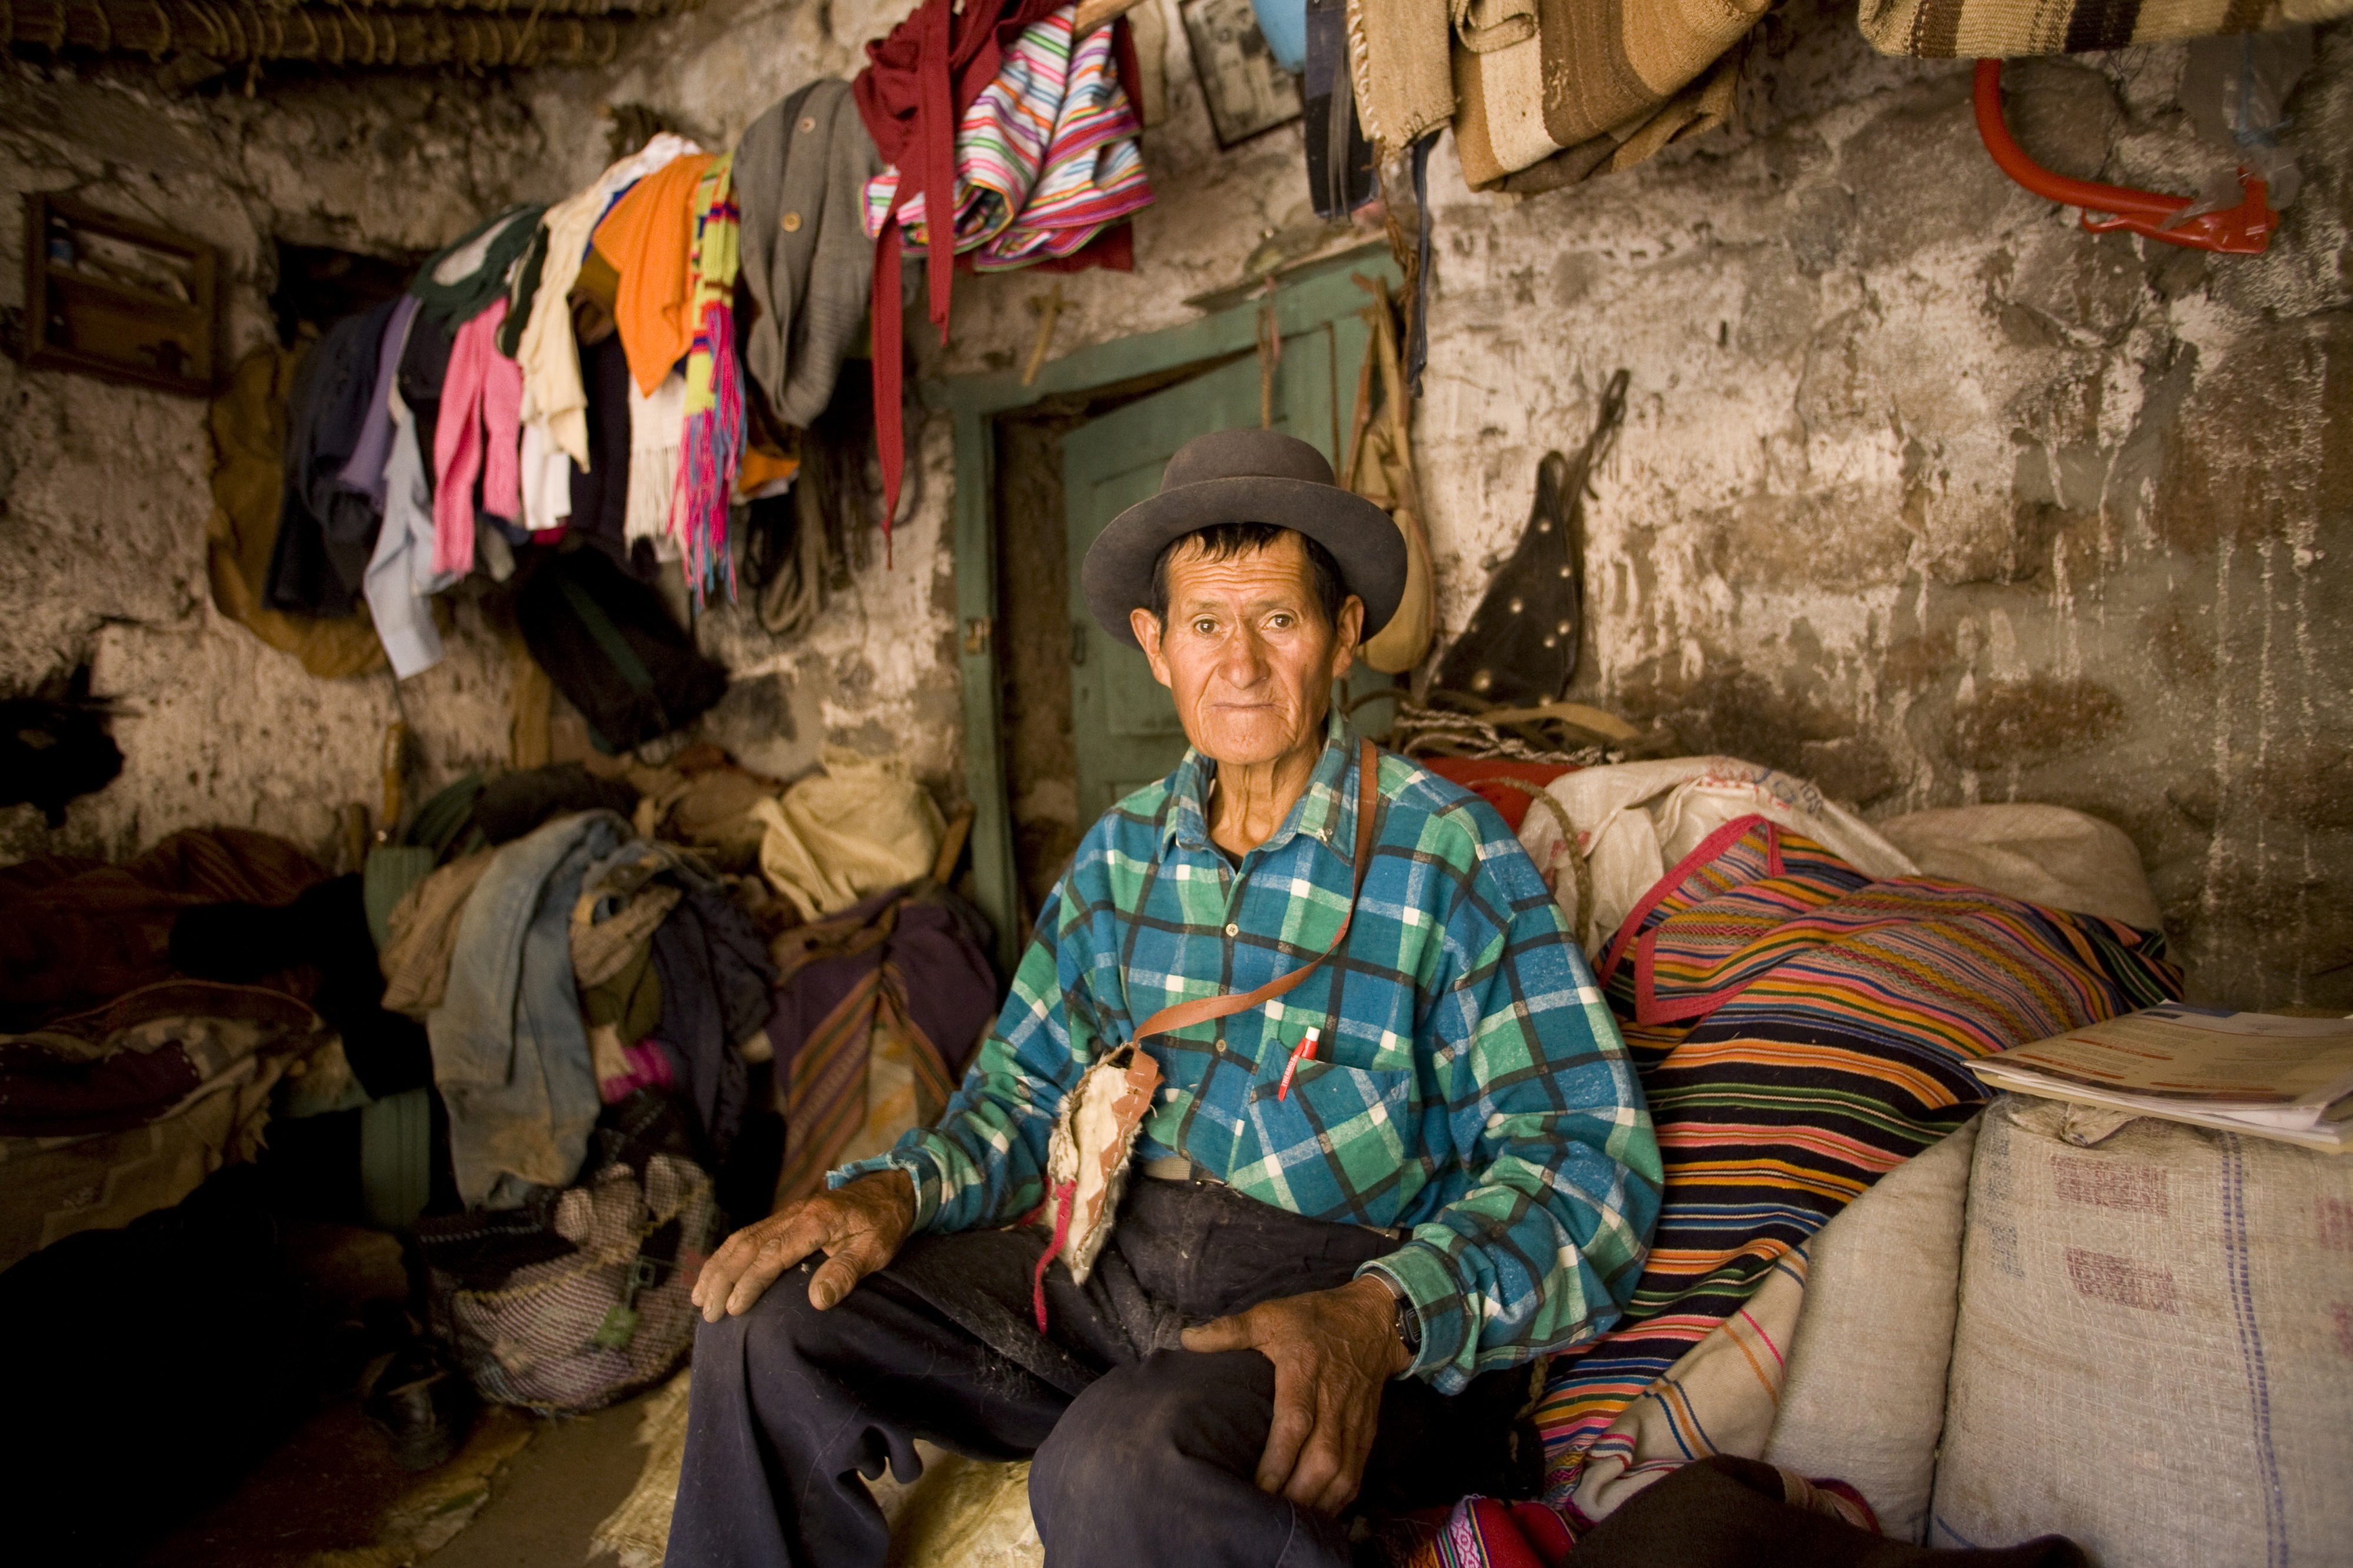 An older man sits in his house in Peru.